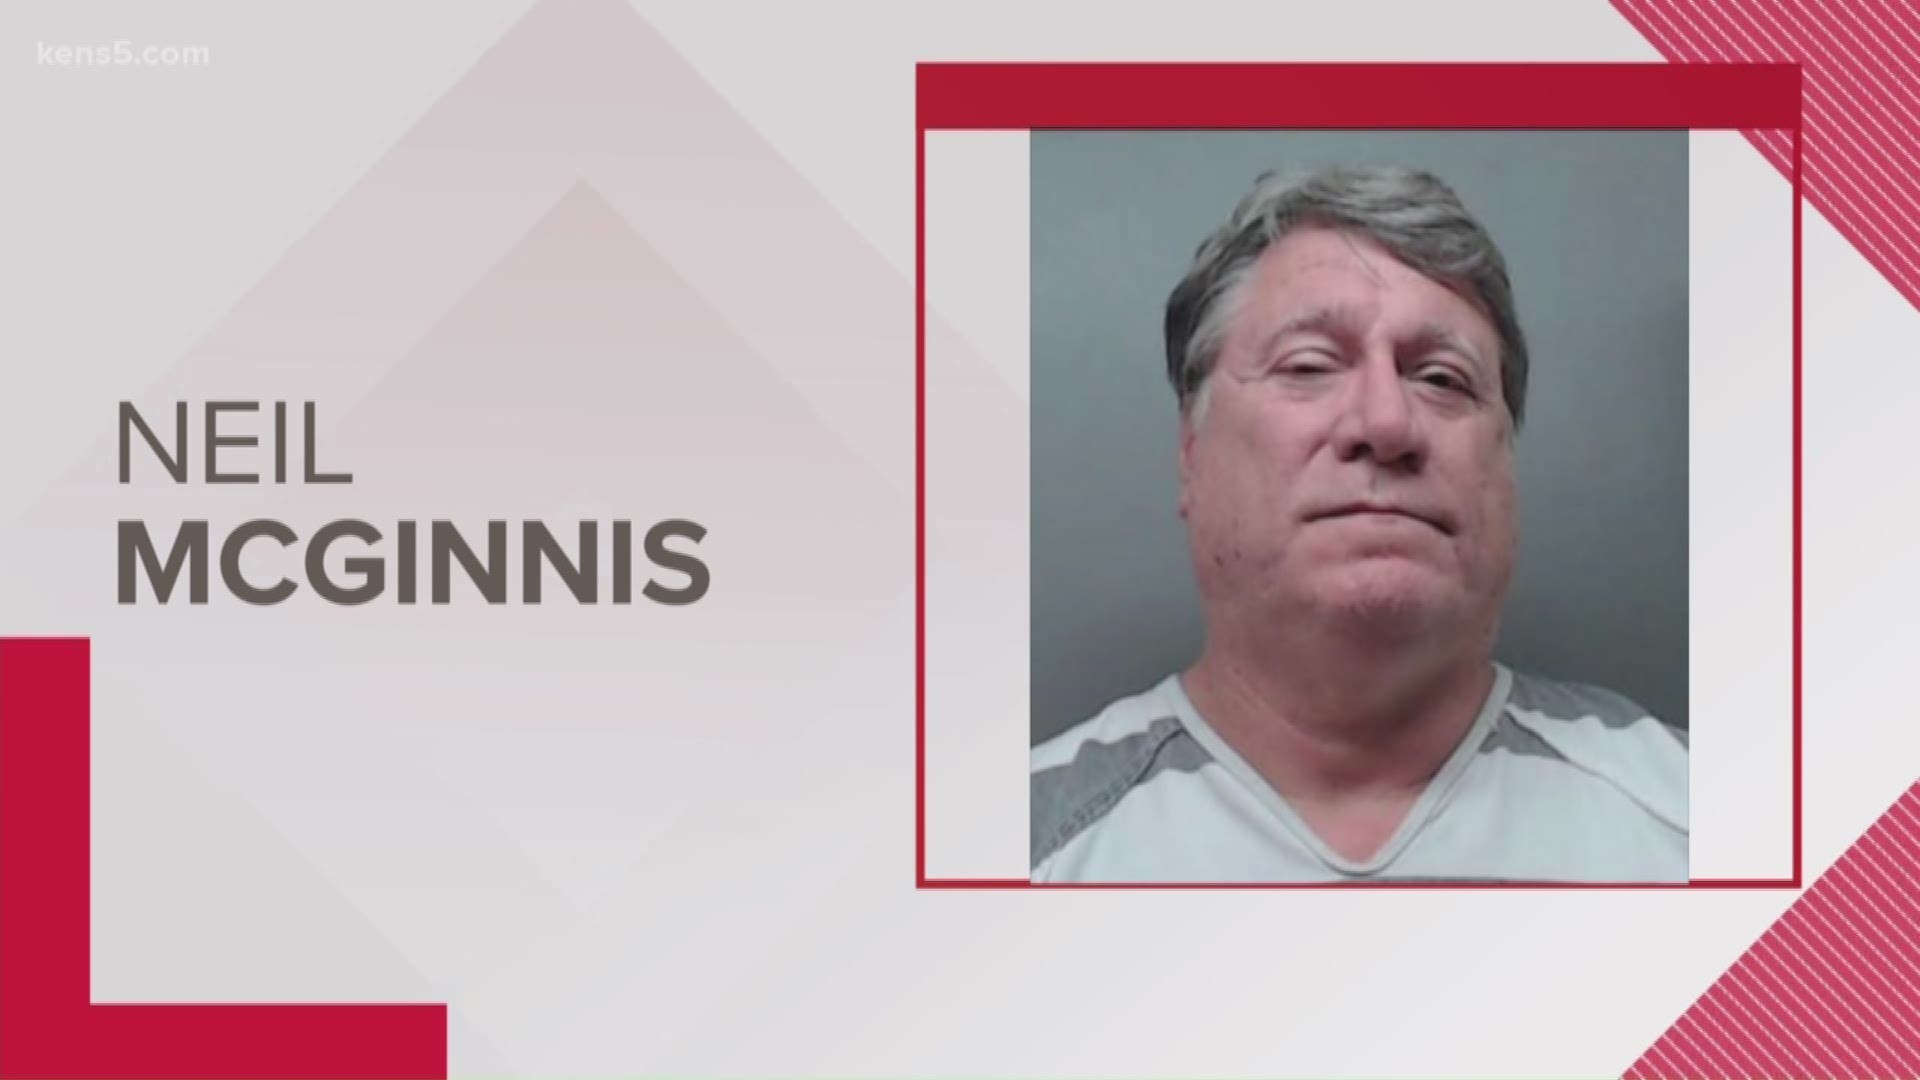 Neil McGinnis, 60, taught grade at Ridgeview Elementary for 10 years before retiring. He's been charged with possessing 10 images of child pornography.